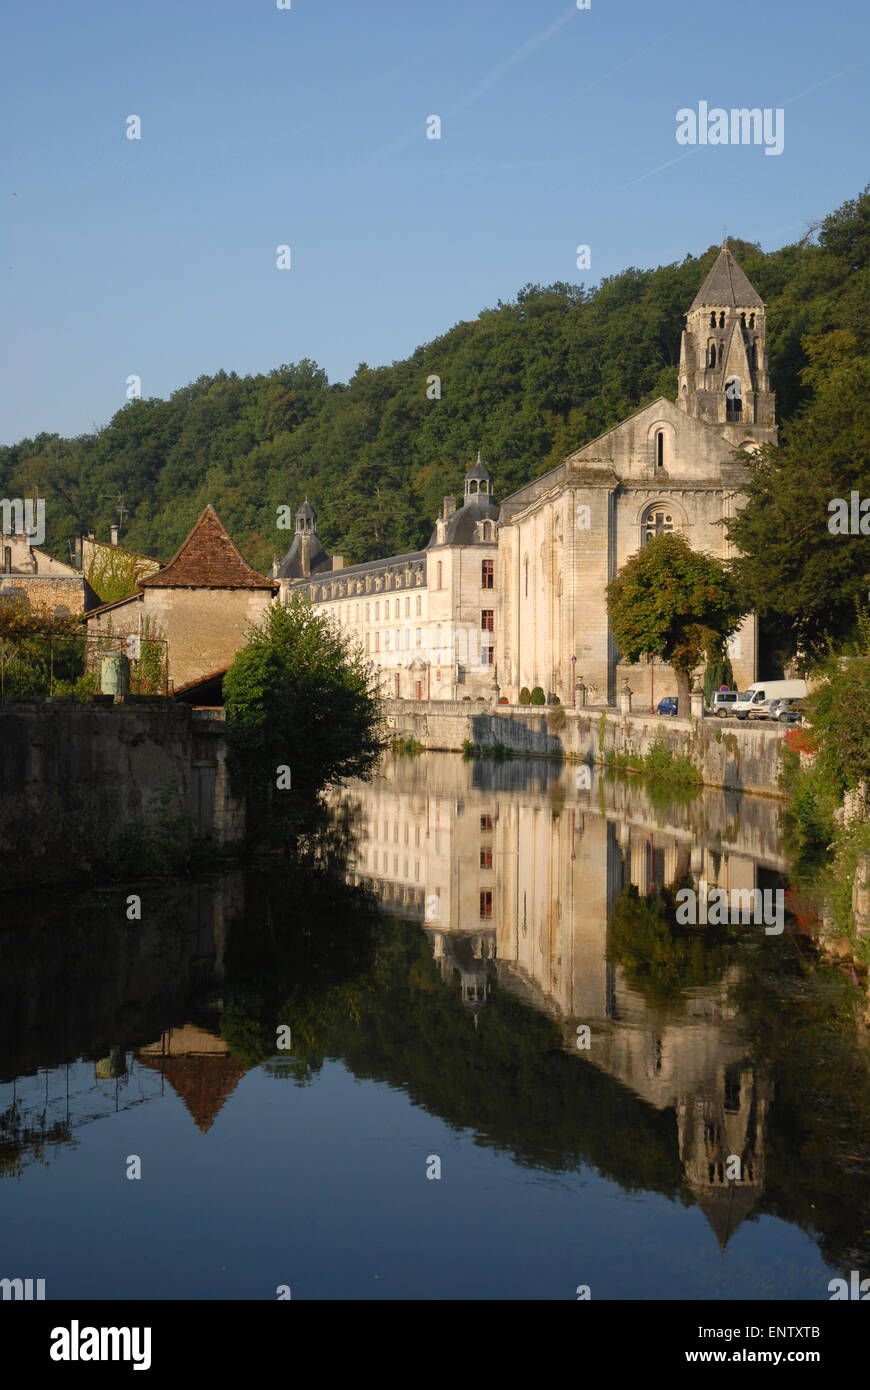 Benedictine Abbey reflected in the River Dronne, Brantome, Dordogne, France Stock Photo